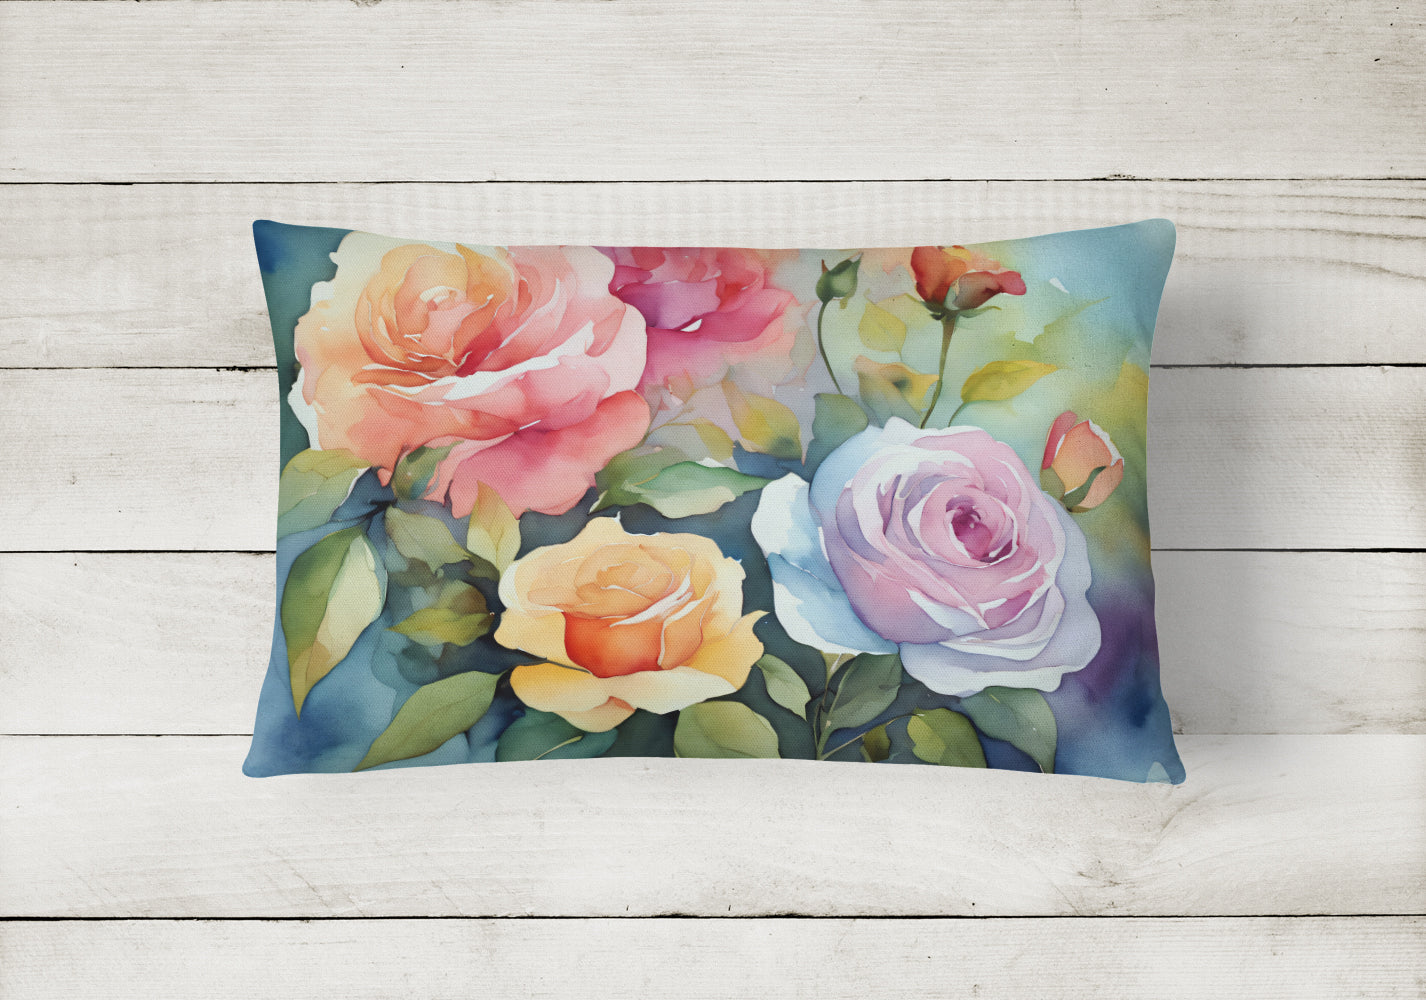 Buy this Roses in Watercolor Fabric Decorative Pillow